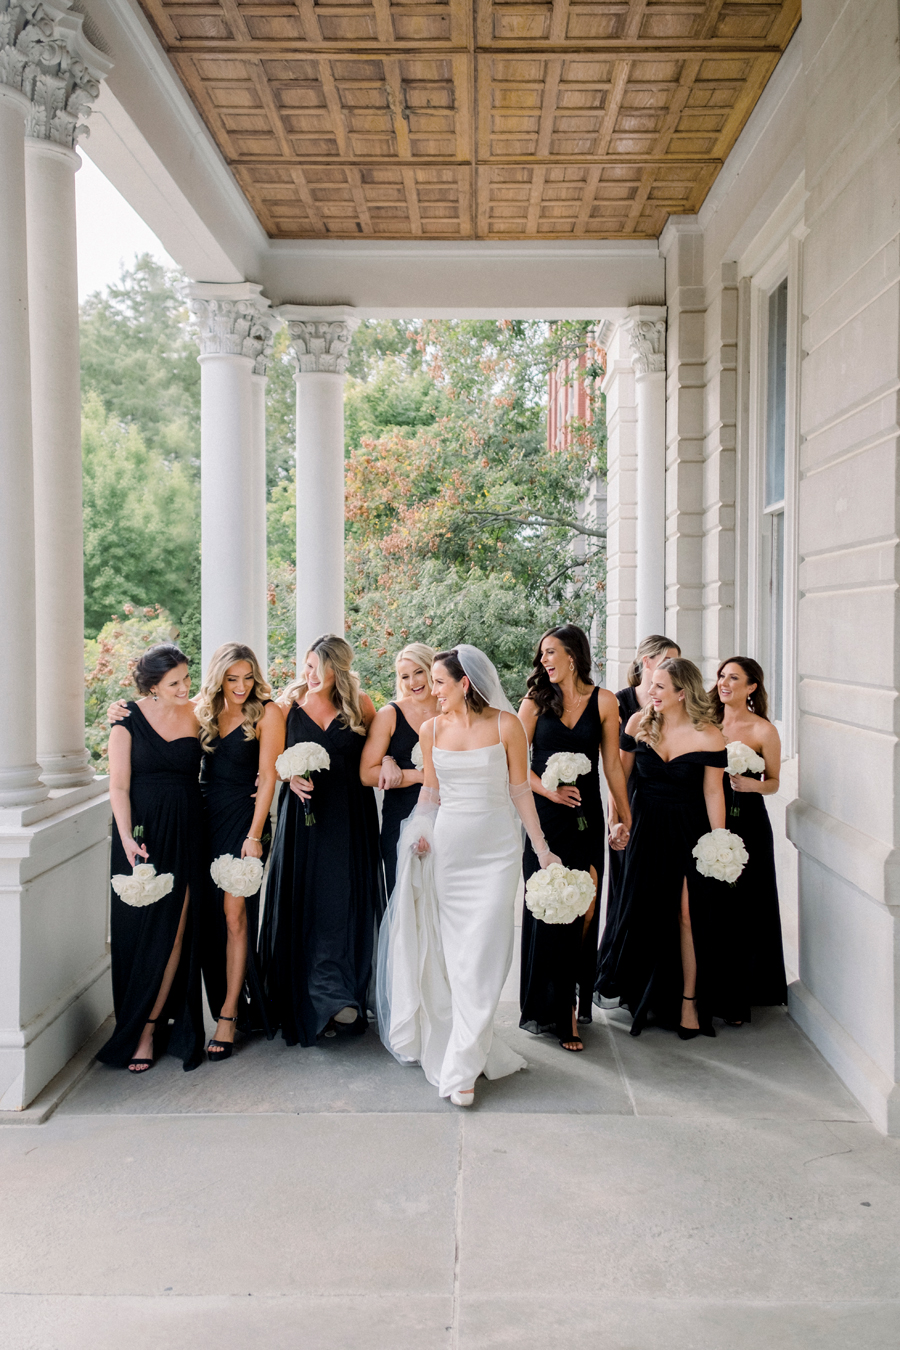 A bride poses with her bridesmaids on the University of Missouri's campus for her Stephens College wedding photographed by Columbia, Missouri wedding photographer Love Tree Studios.